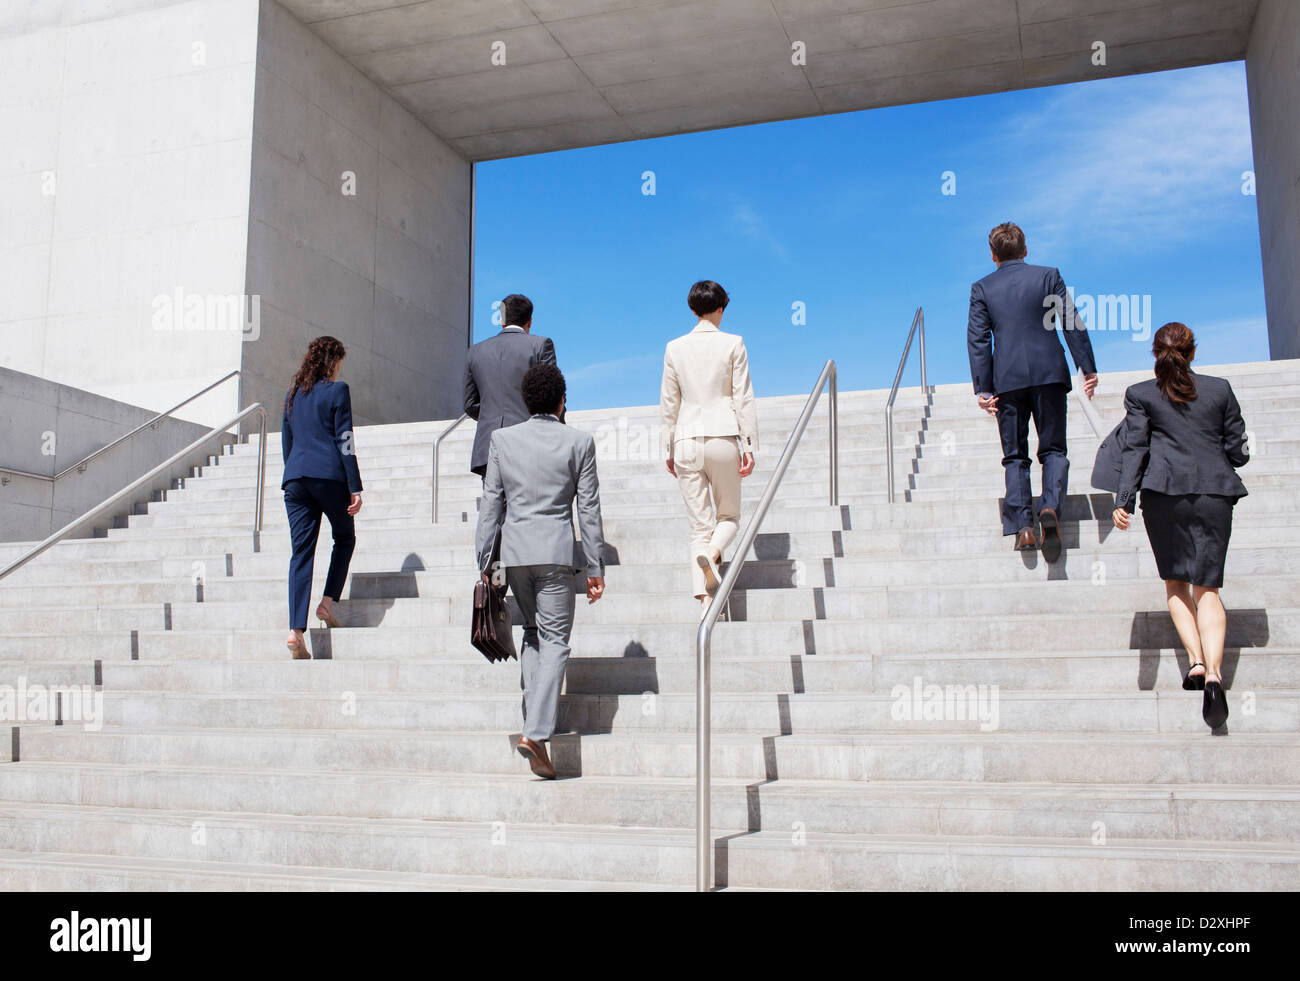 Business people ascending urban stairs Stock Photo